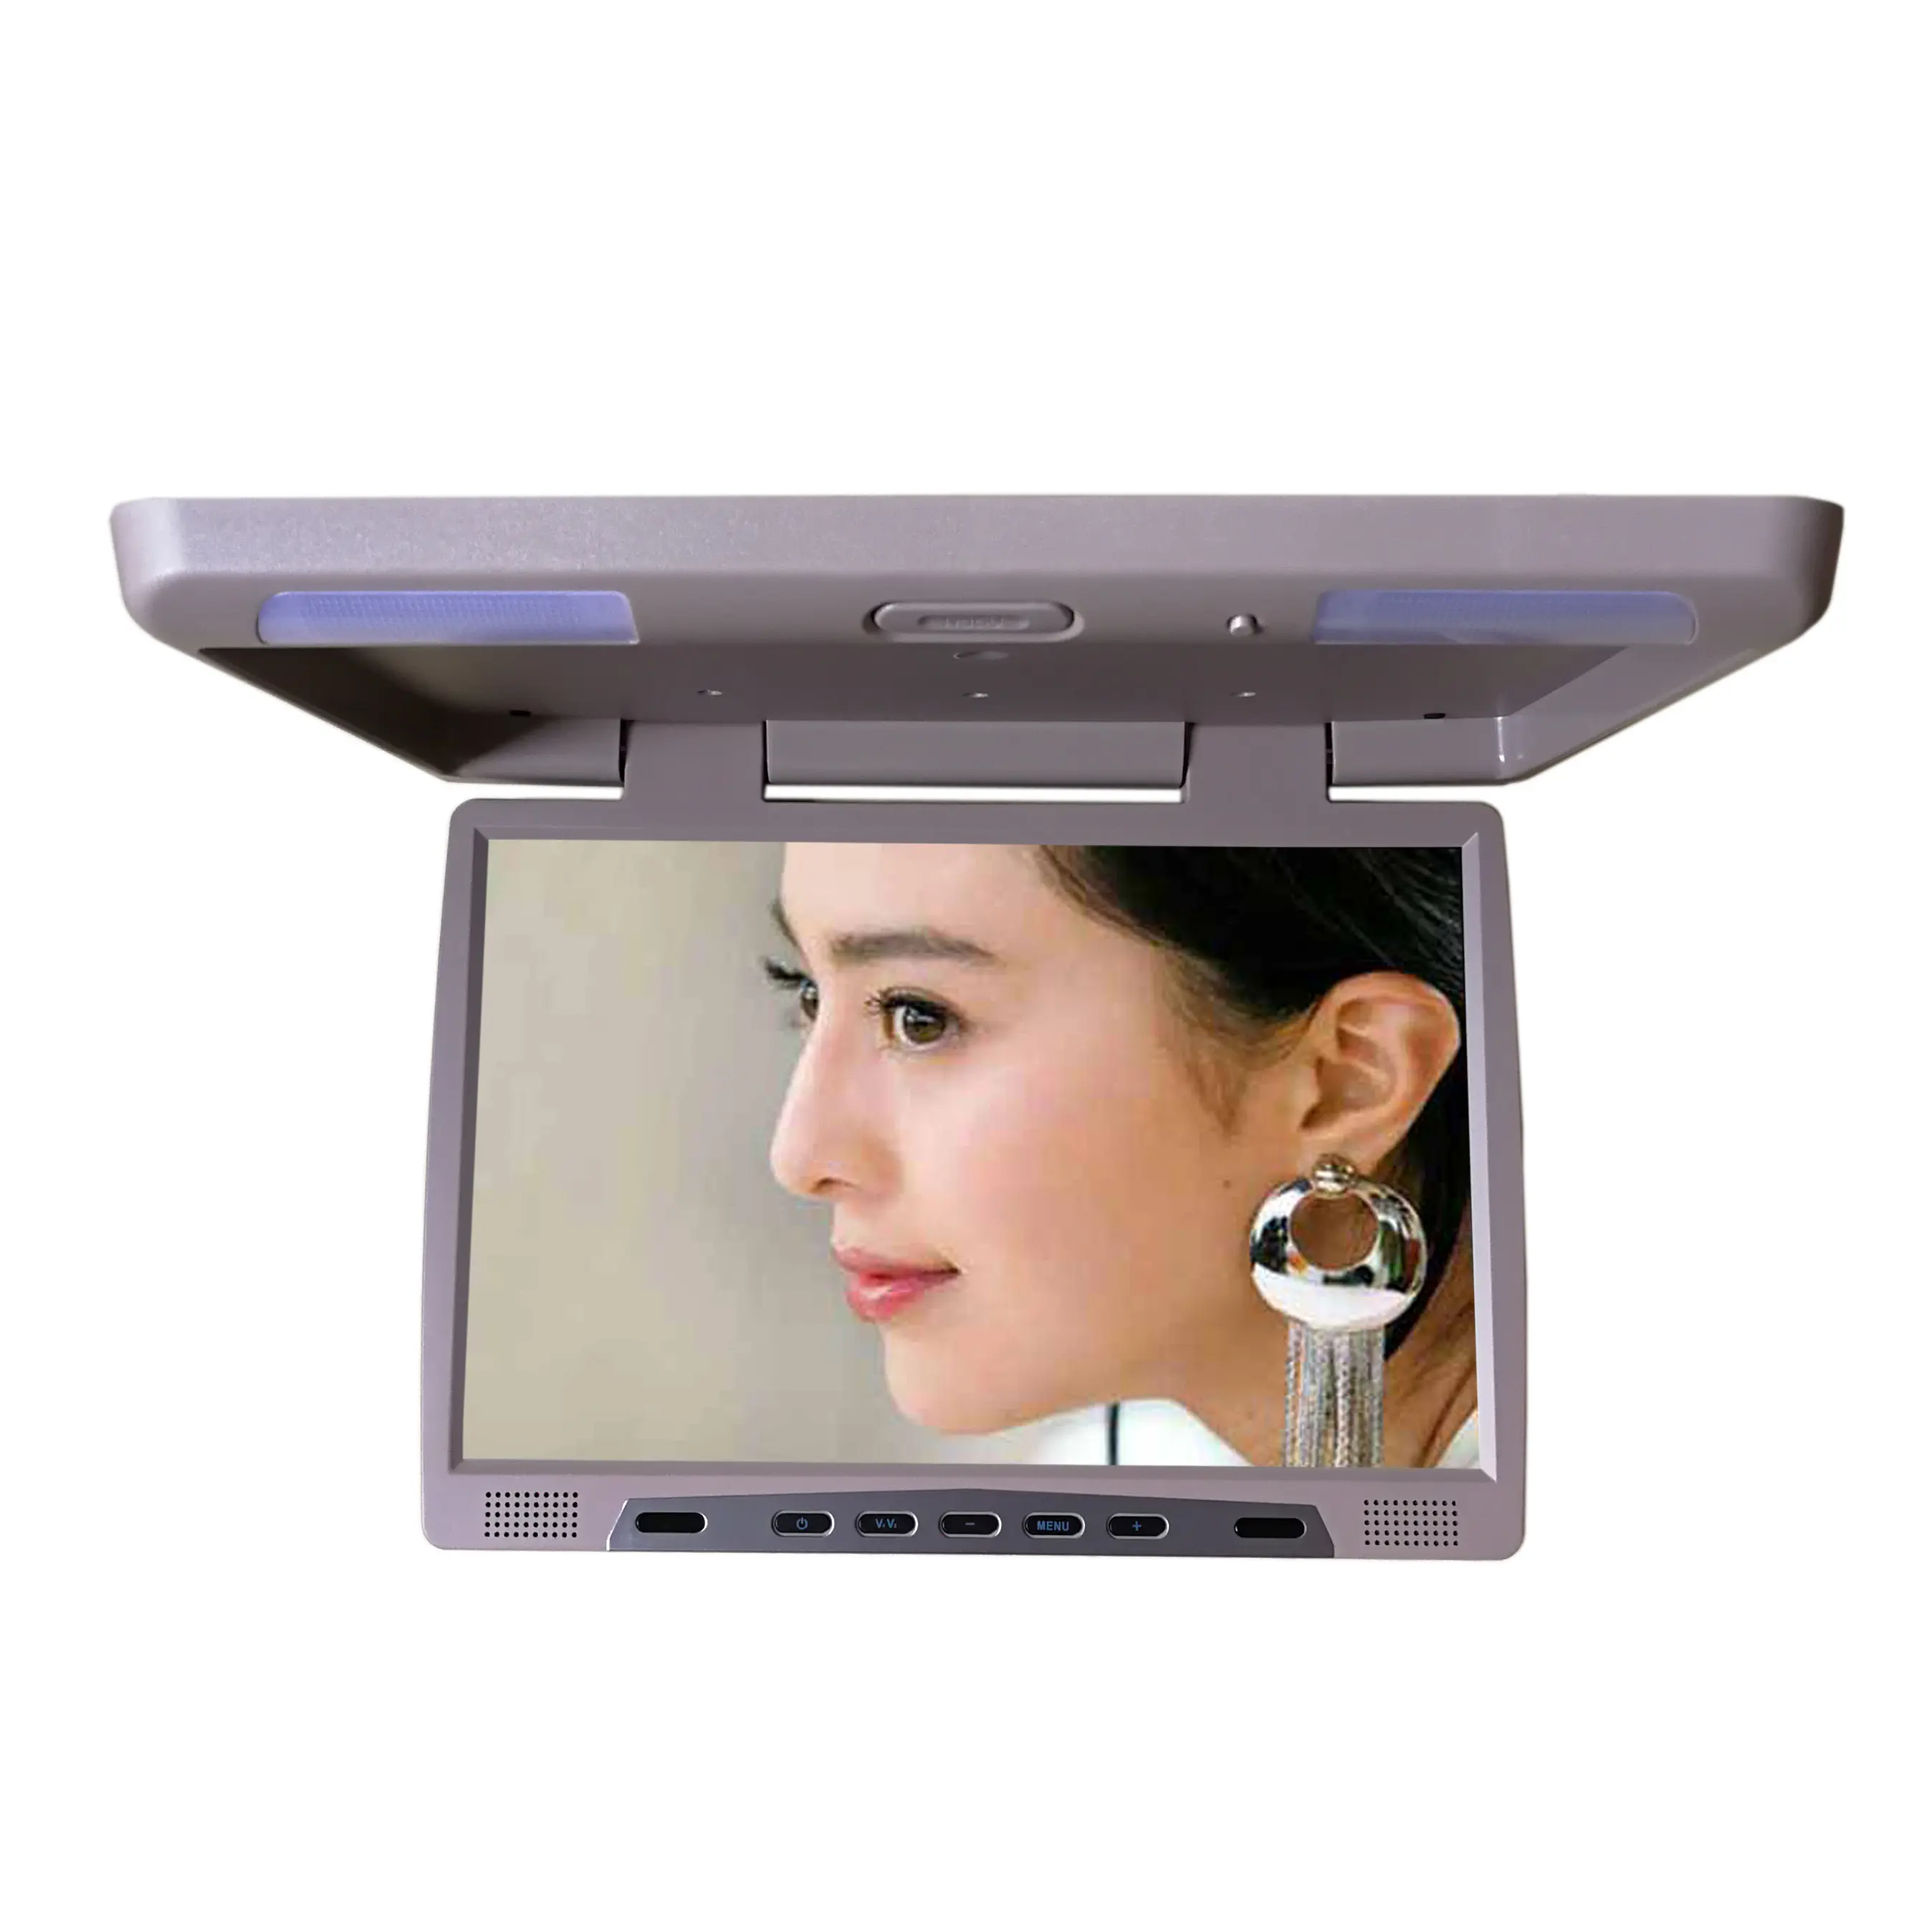 17 inch motorized roof mount/ flip-down monitor black mirror dvd for car/bus/train/subway/plane with HD input